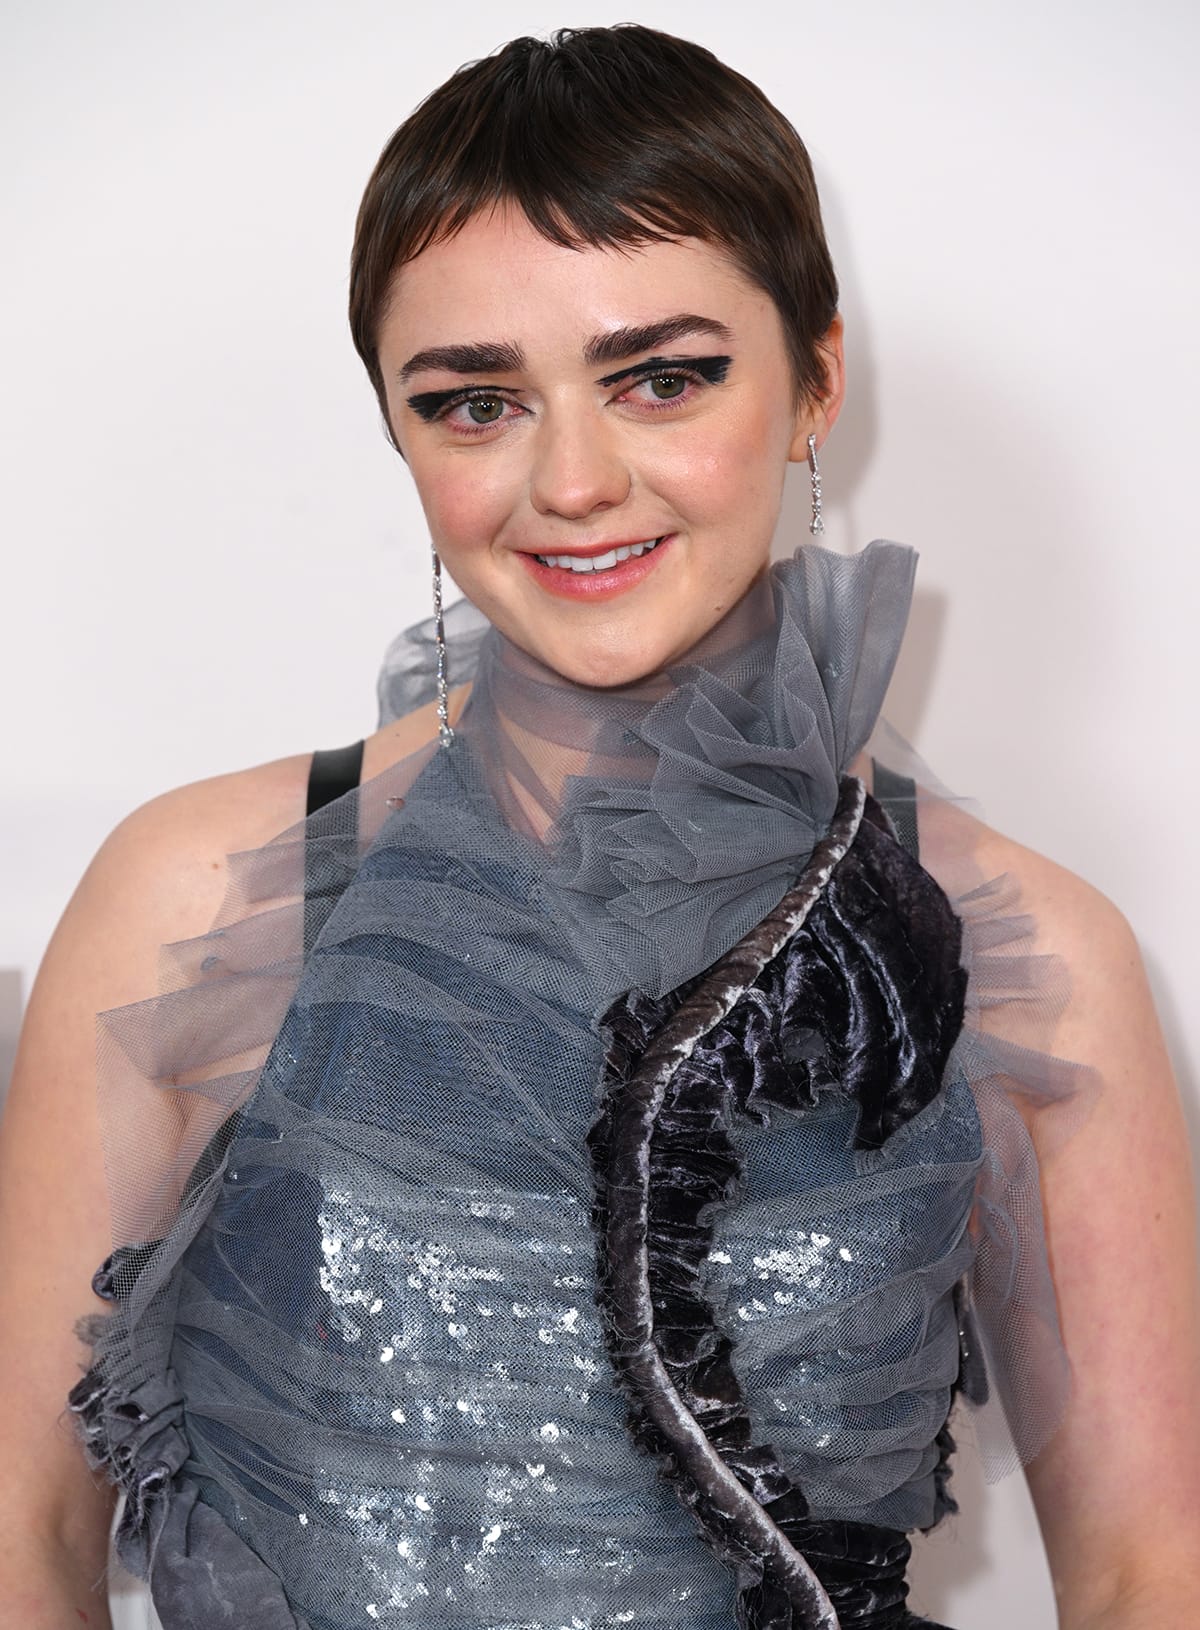 Maisie Williams rocks her glossy pixie haircut and wears theatrical makeup with smokey abstract eyeshadow